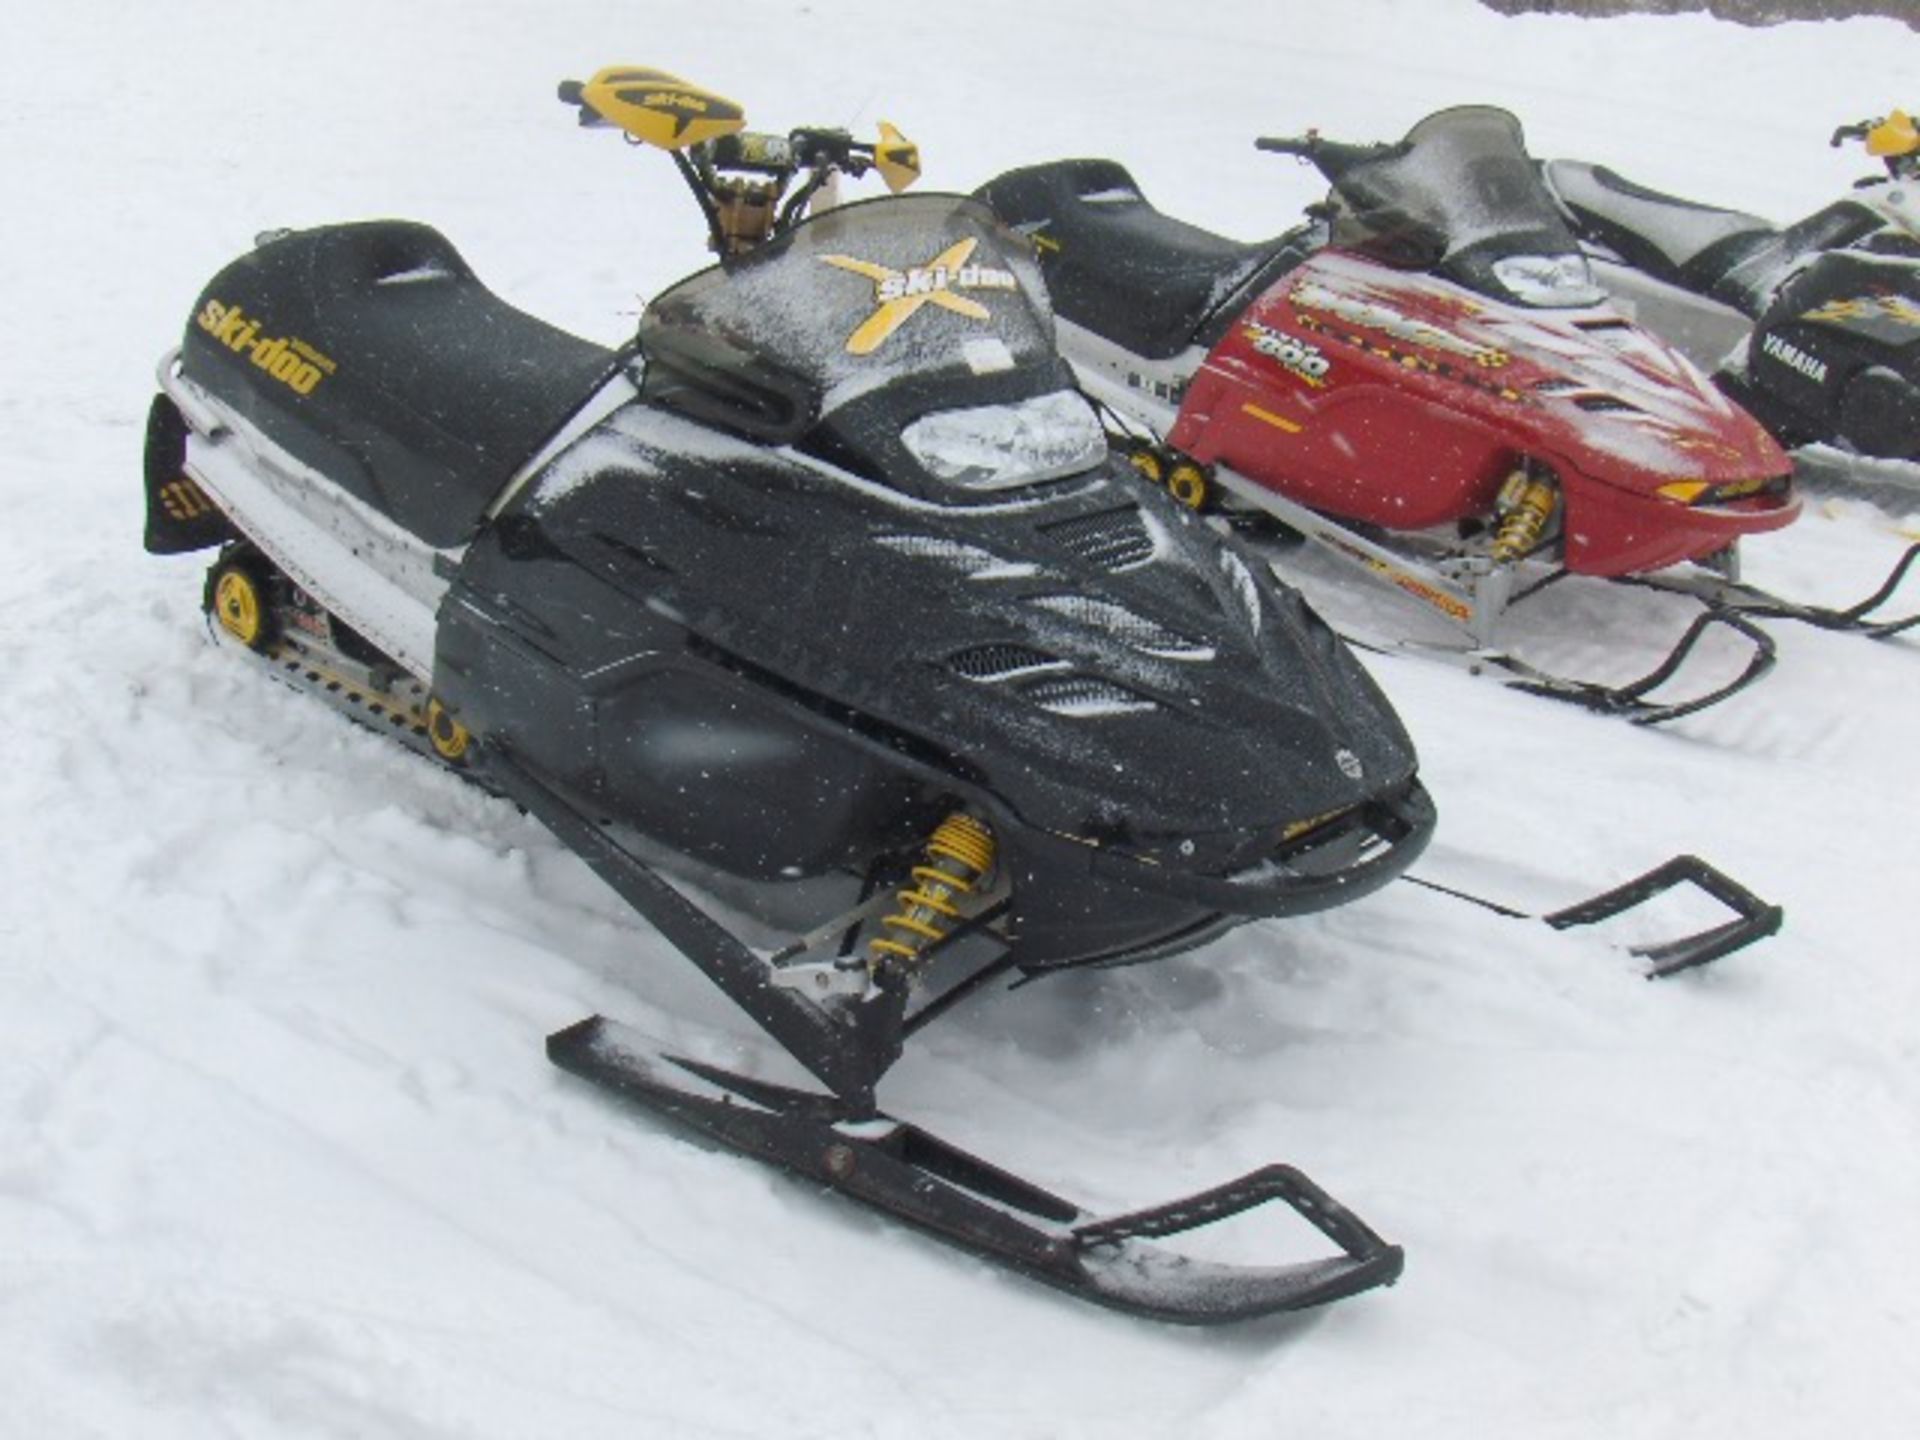 2000 SKI DOO 600 MXZ  2BPS16228YV000117 snowmobile, Ripsaw with dyno port pipe upgrade/suspension - Image 2 of 4